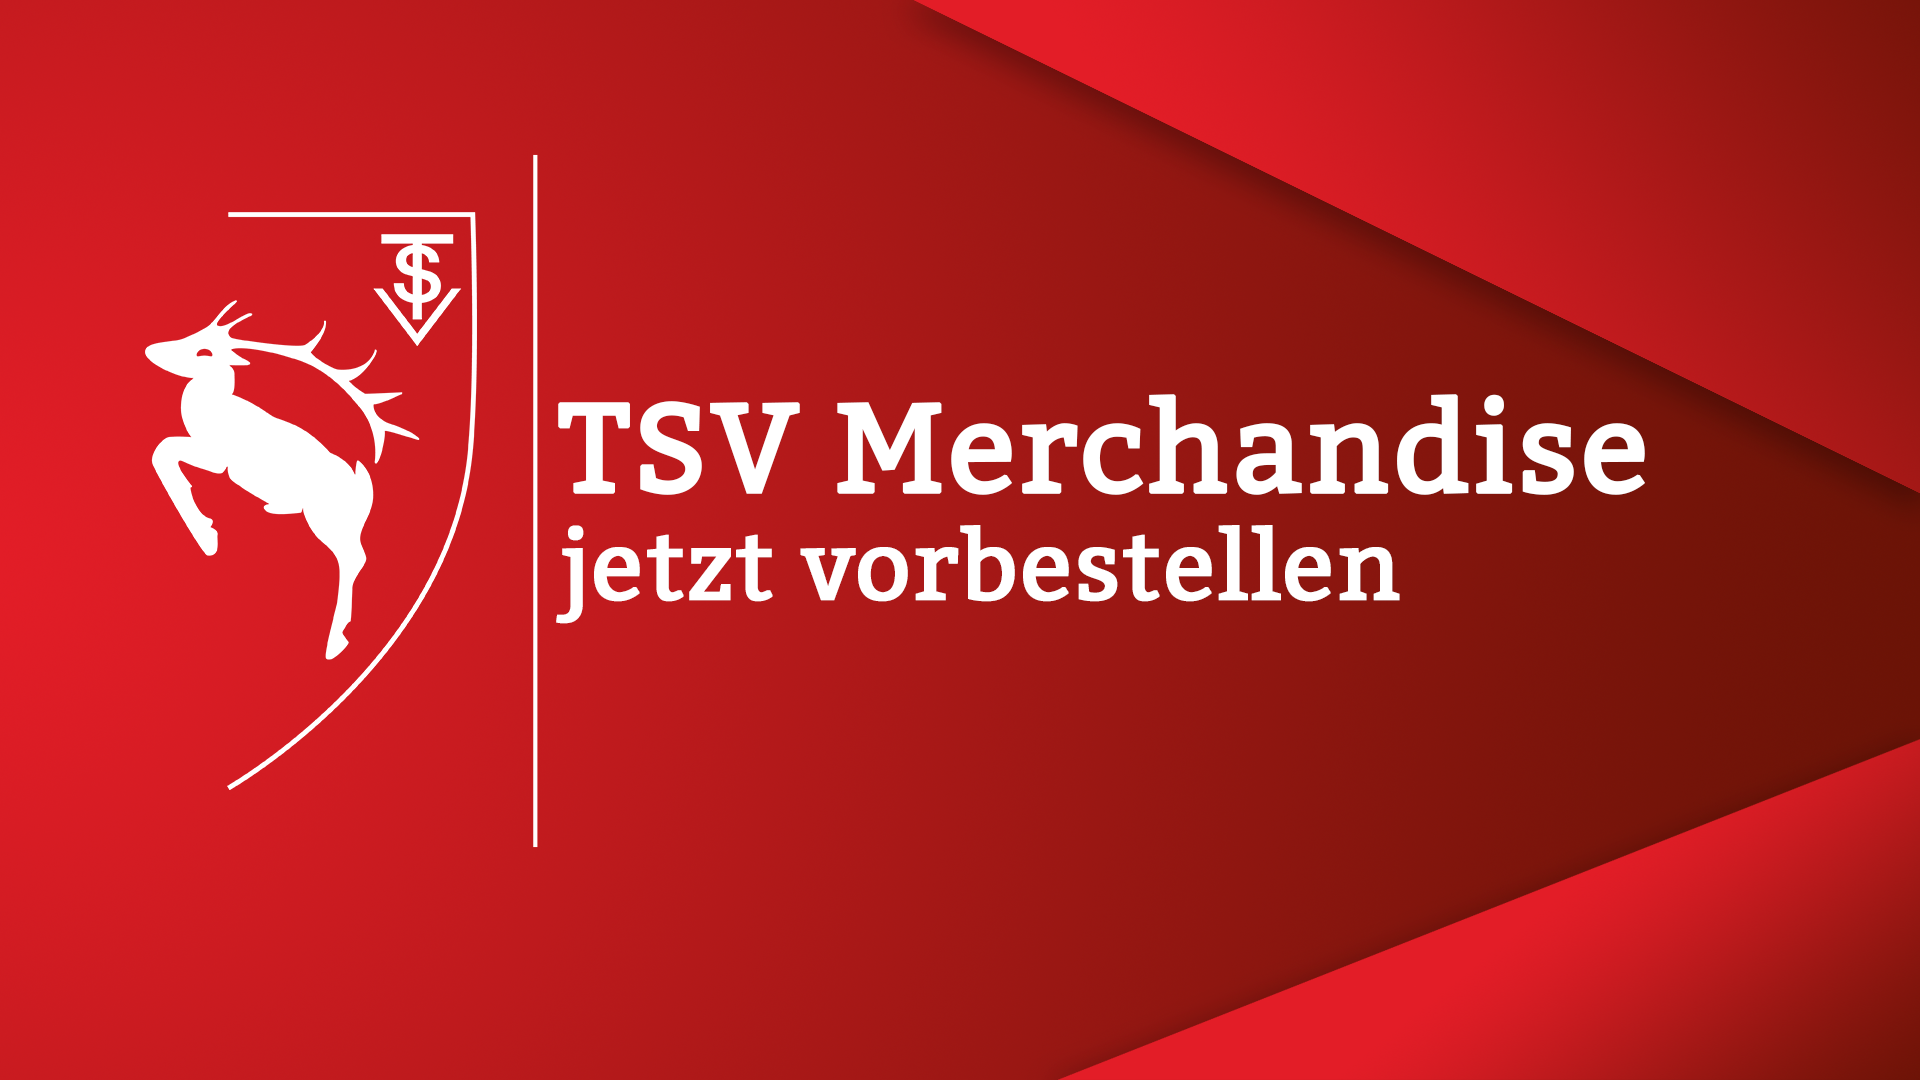 Featured image for “Neuer TSV Merchandise”